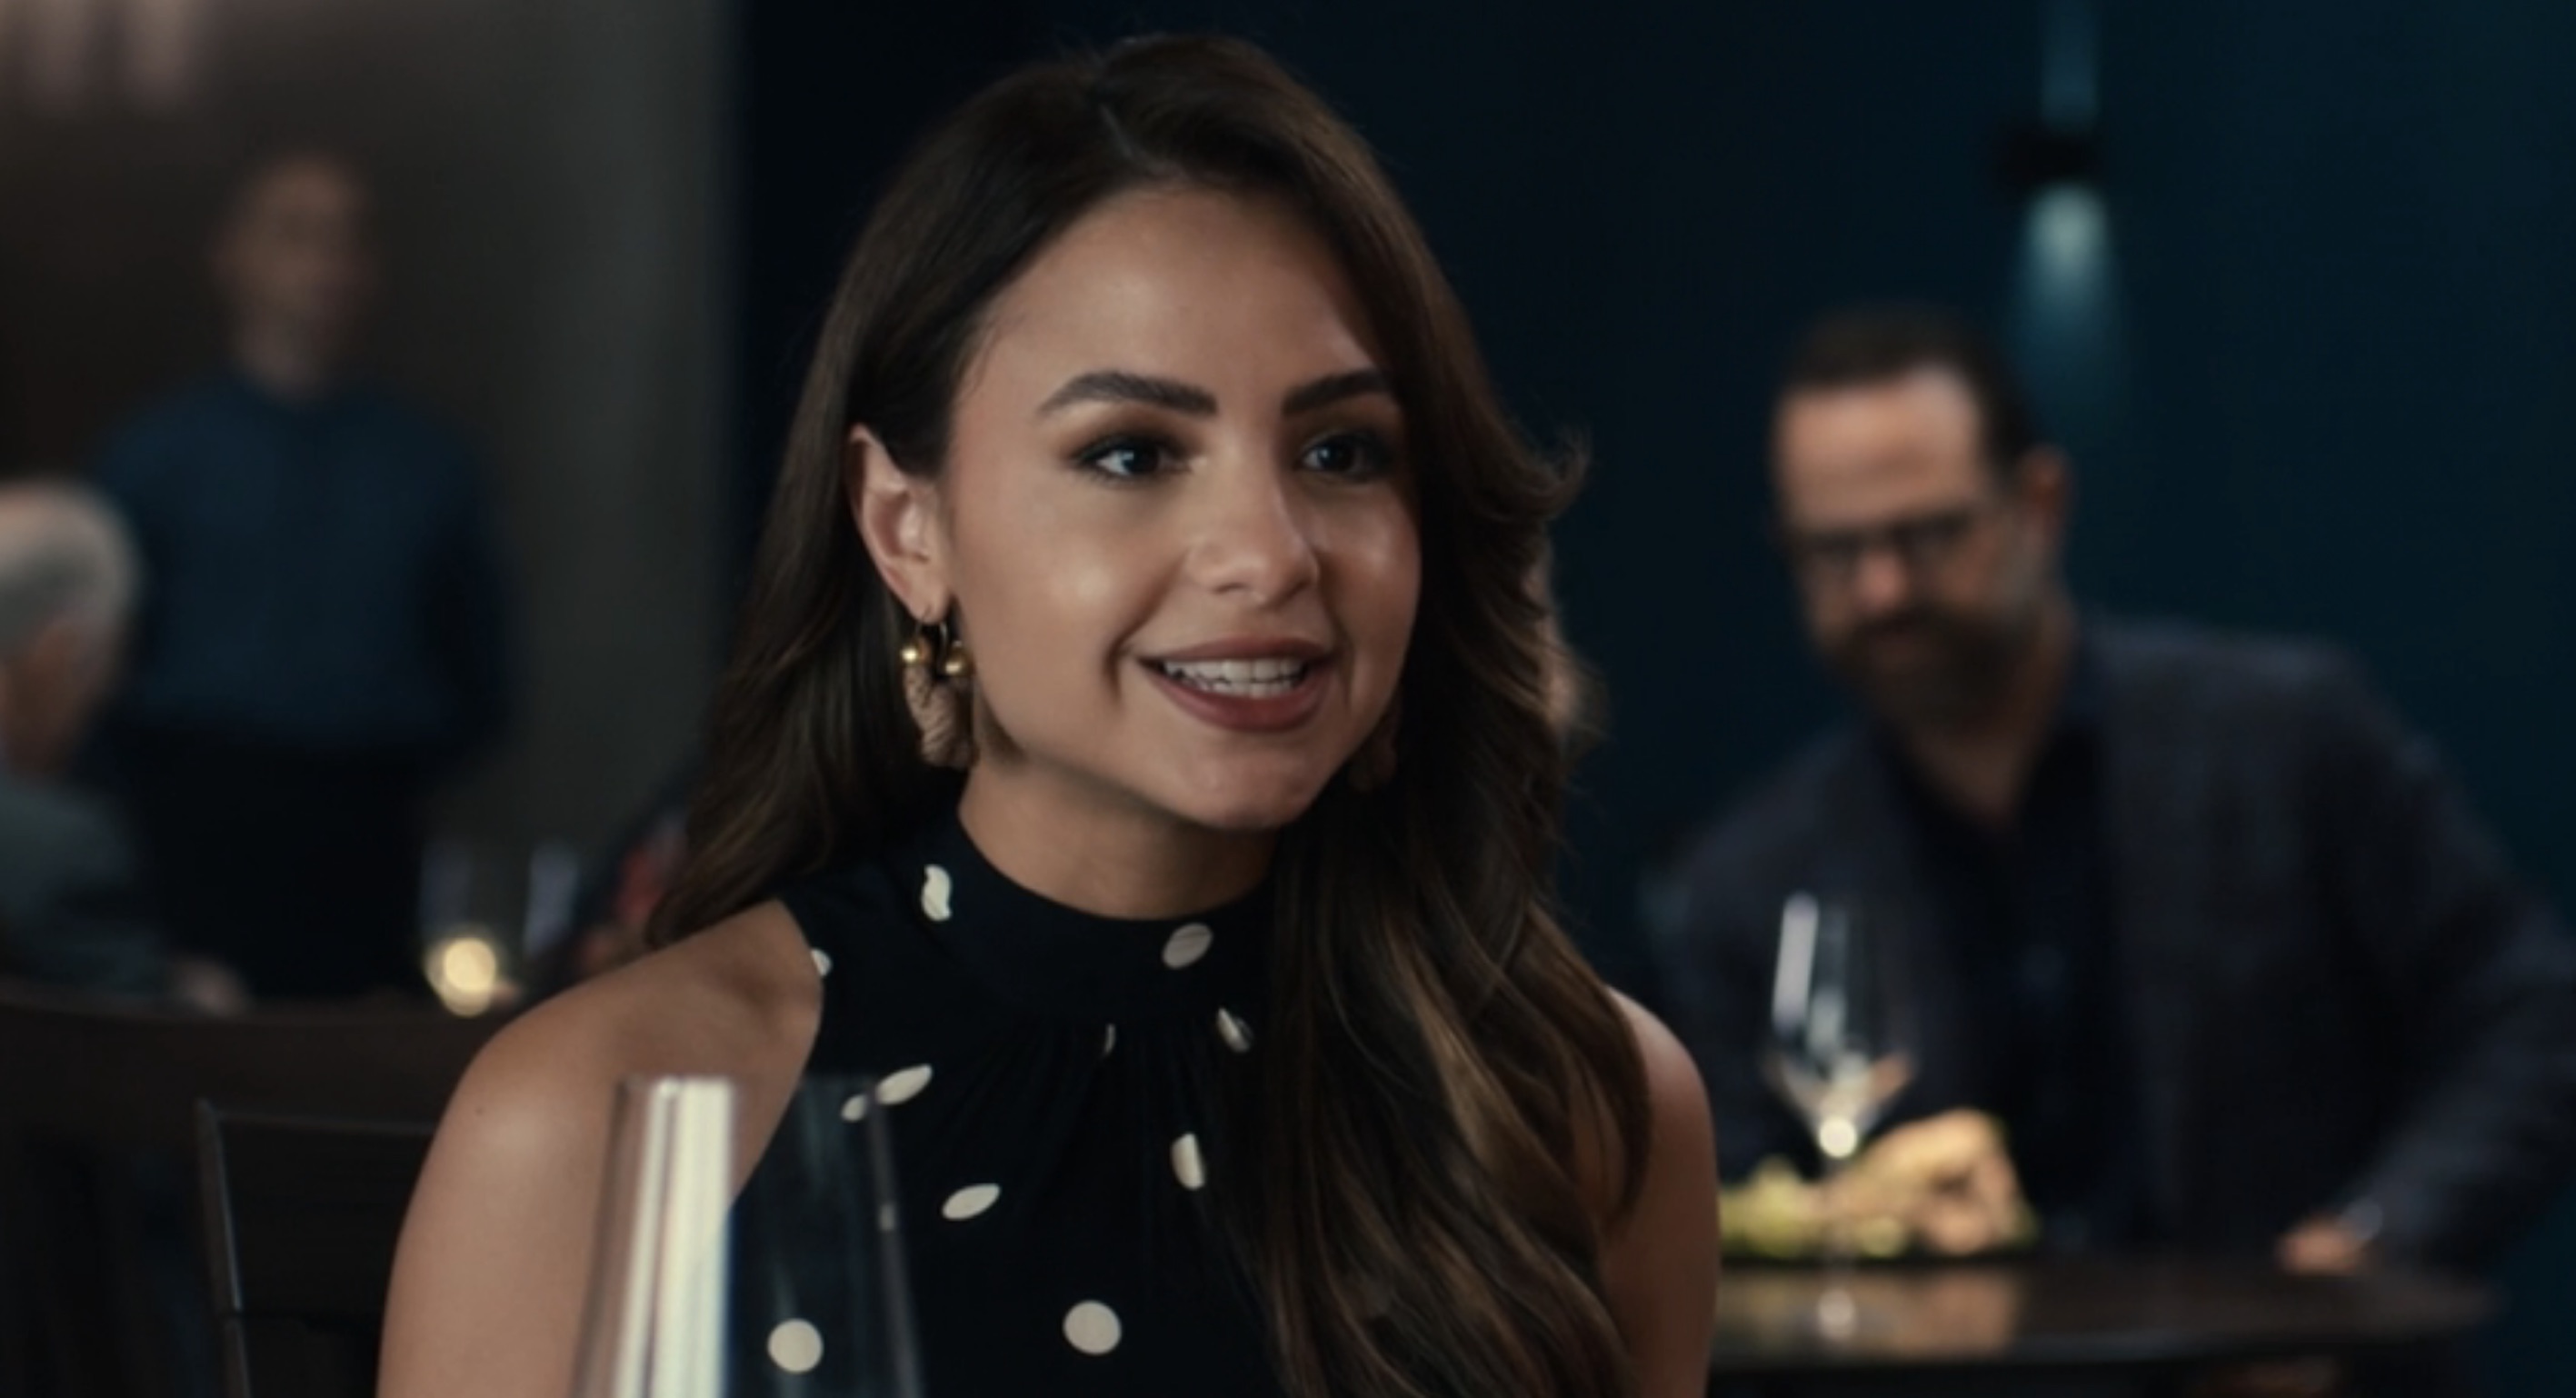 The Menu Cast on HBO Max - Aimee Carrero as Felicity